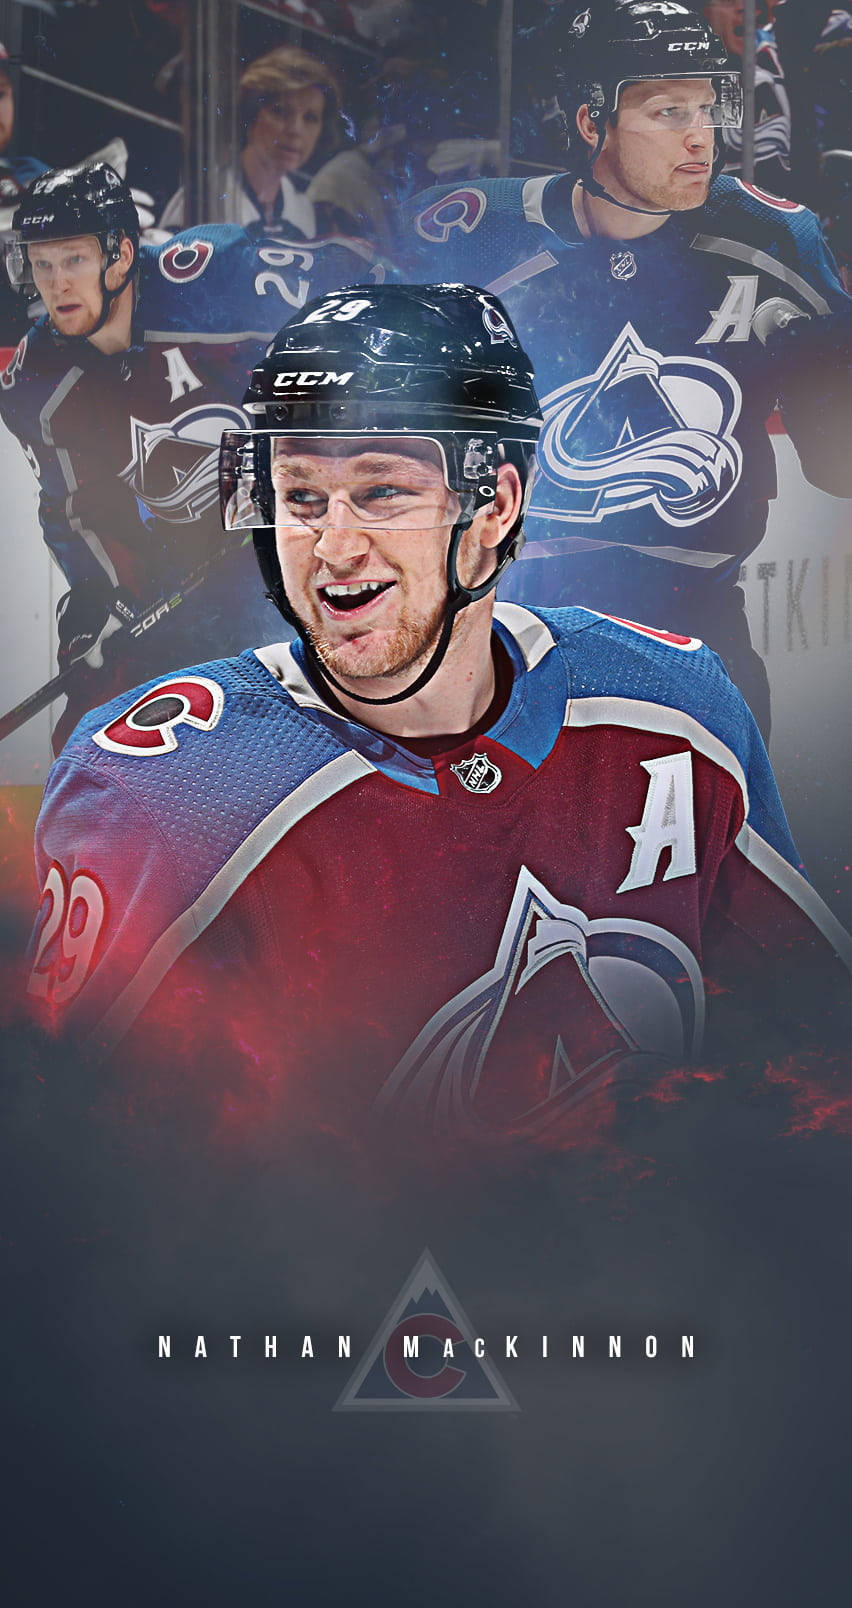 Nathan Mackinnon in Action on the Ice Wallpaper